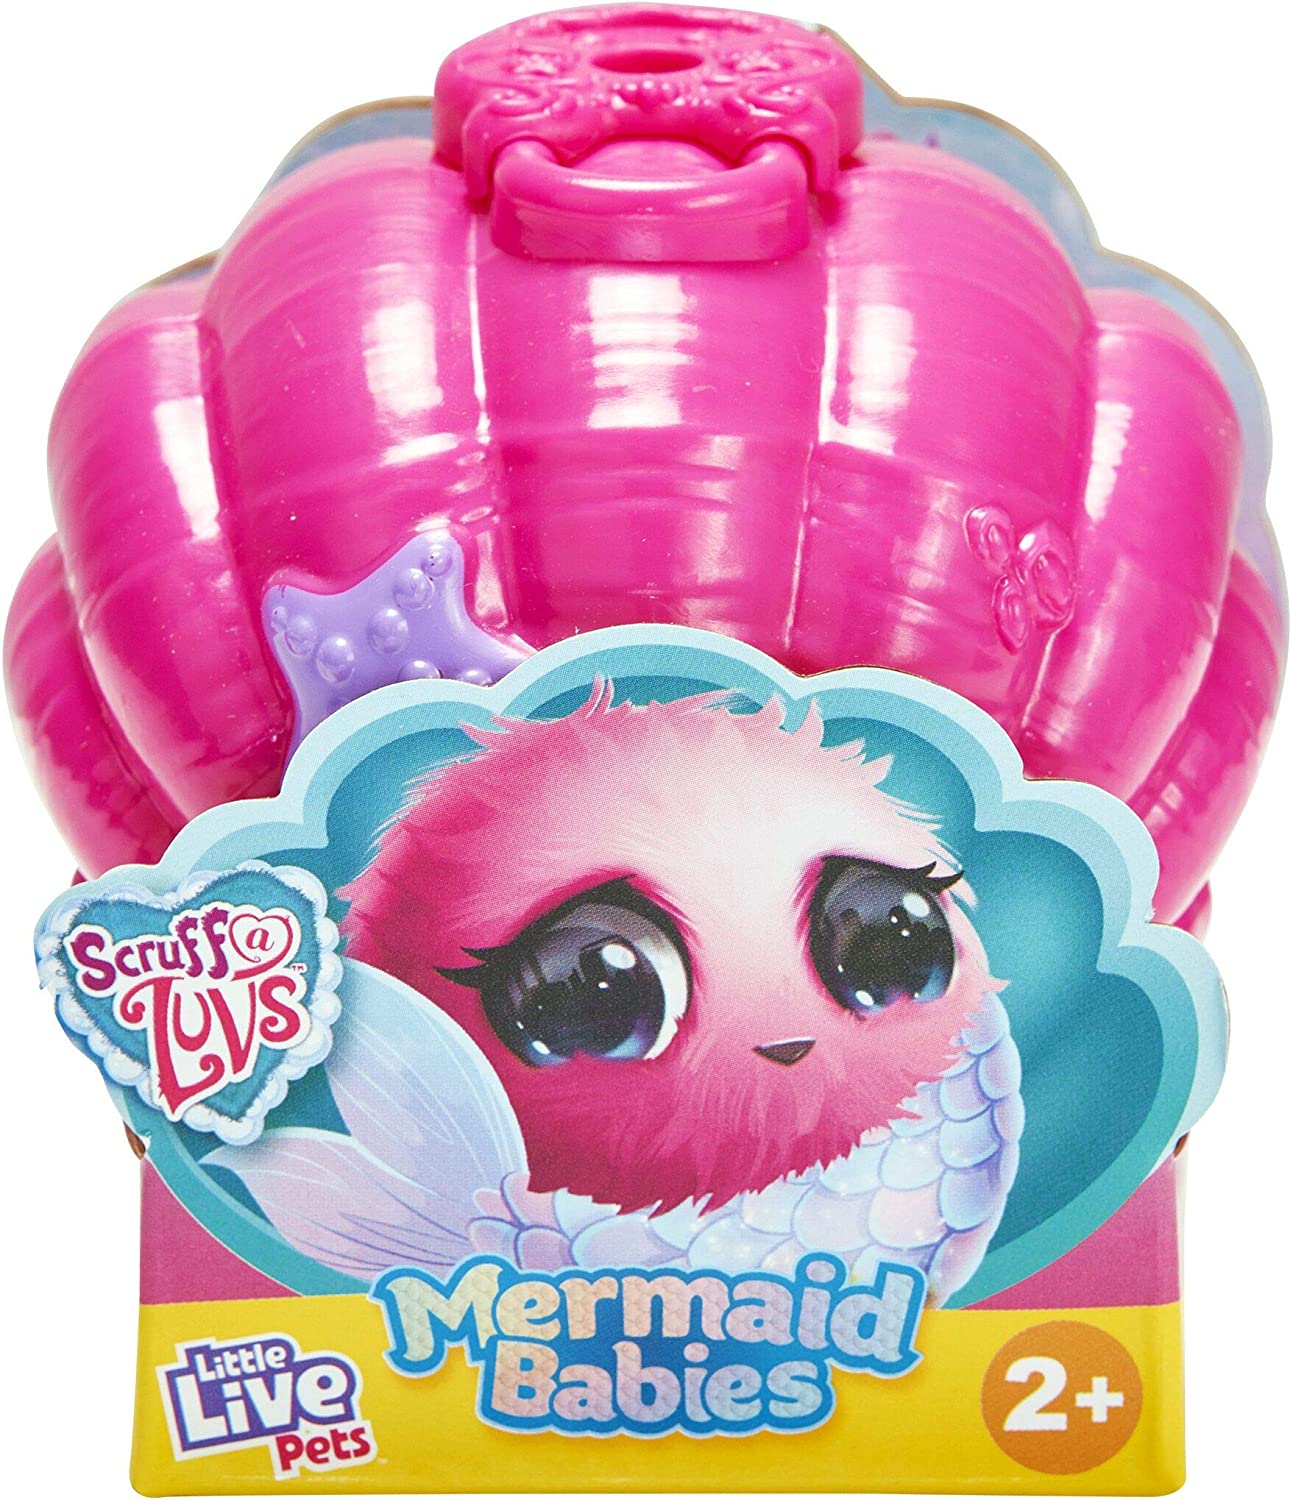 Collect Scruff-a-Luvs Mermaid Babies- Adorable Mermaid Babies are Waiting for You to Rescue Them! Lots to (One Sent at Random)